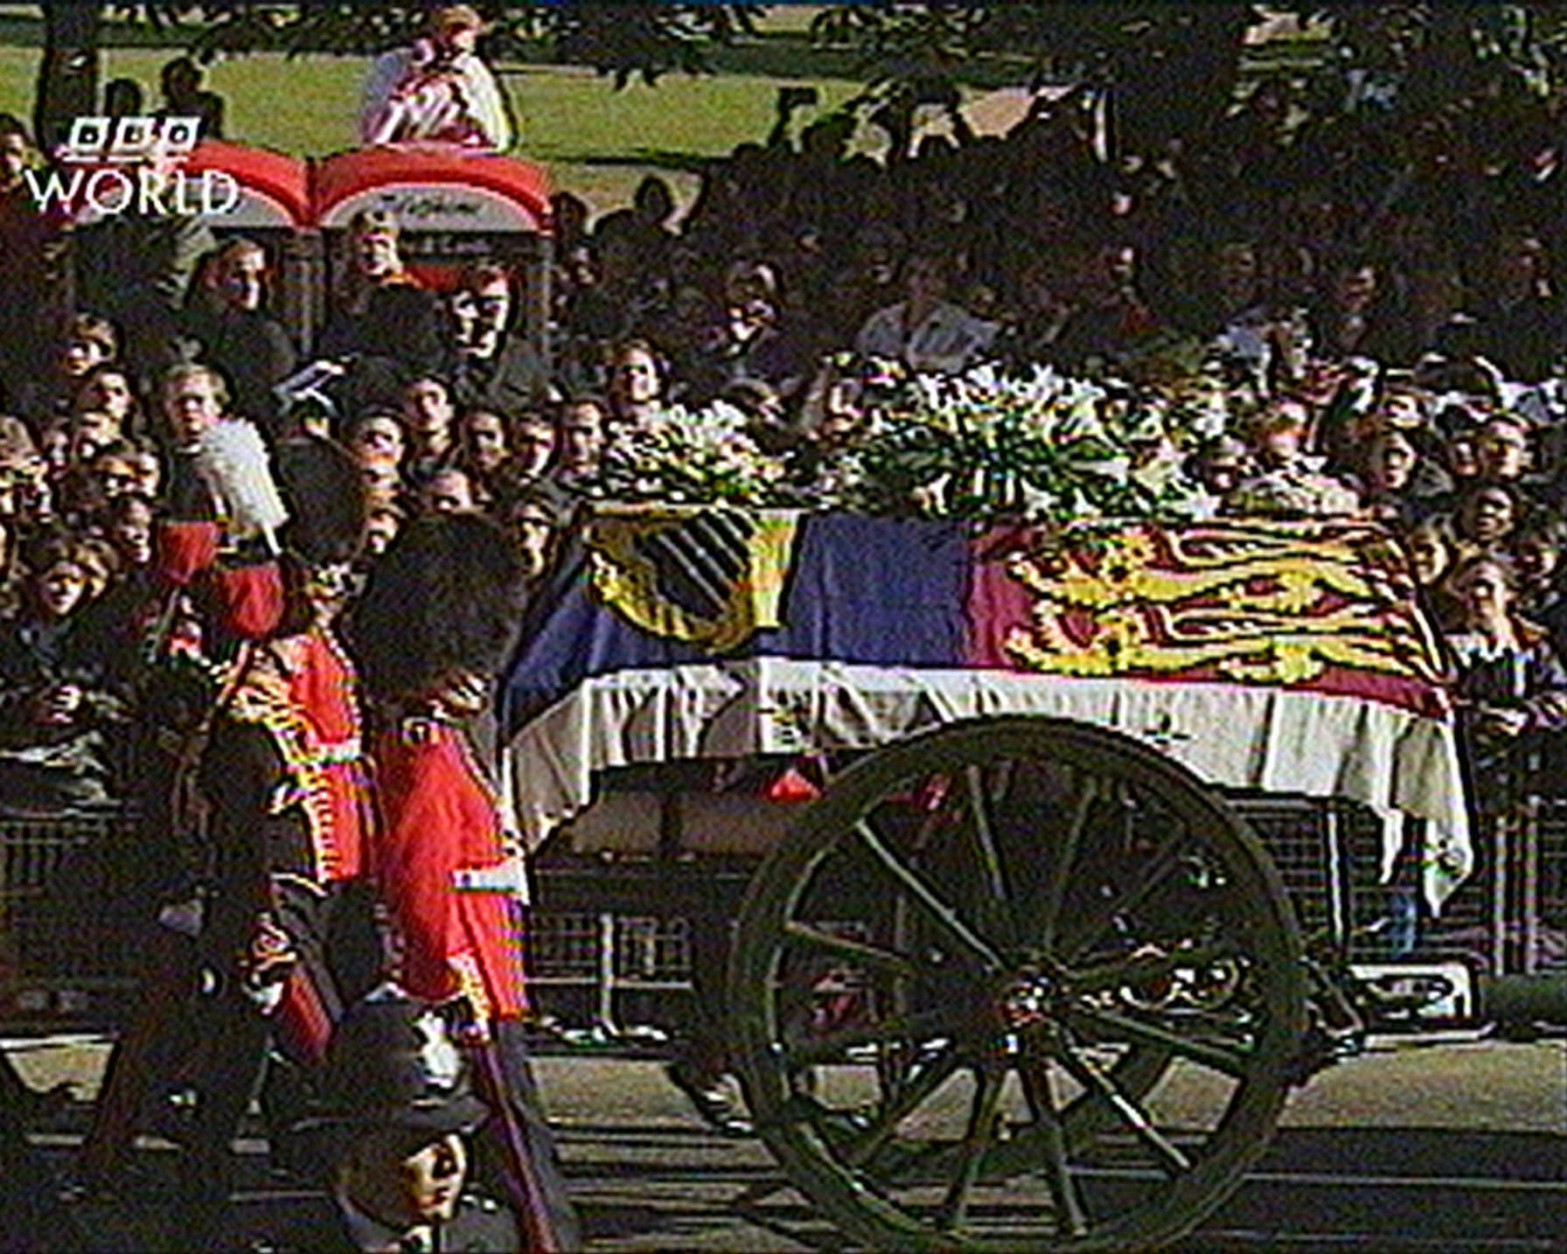 The gun carriage bearing the coffin of the Princess Diana, draped in the Royal Standard, leaves London's Kensington Palace on route for the funeral service at London's, Westminster Abbey, Saturday September 6 1997, in this image made from television. Princess Diana was killed in a car crash in Paris on Aug. 31, along with her boyfriend Dodi Fayed. Following the funeral Princess Diana will be buried at Althorp, 60 miles northwest of London at the Spencer stately home. (AP Photo)